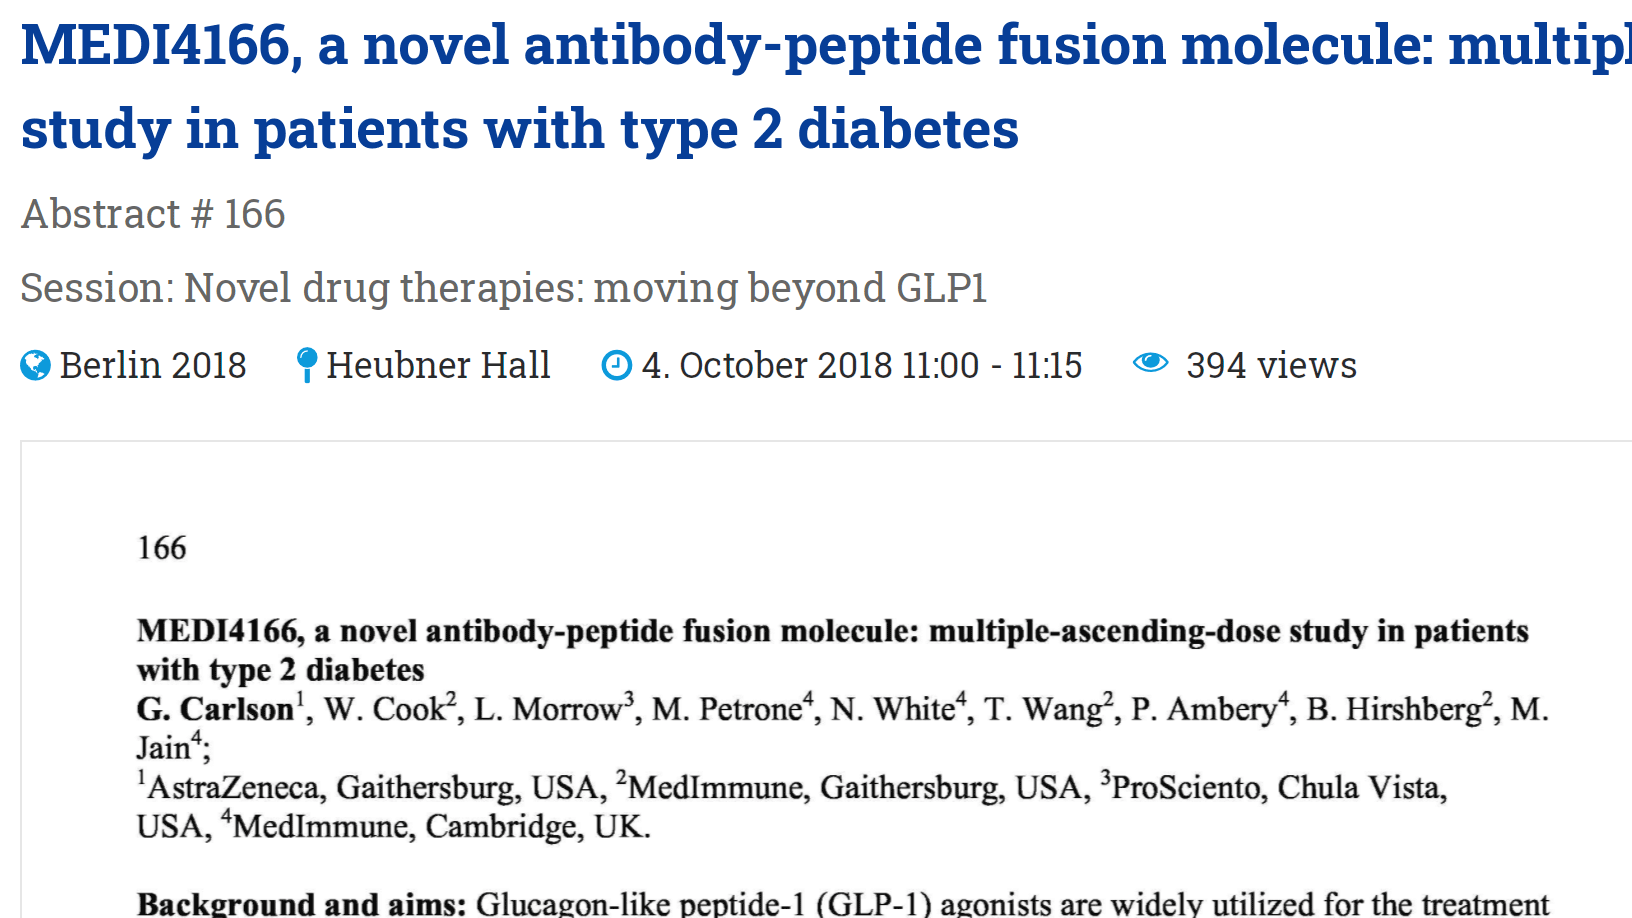 image of MEDI4166, a novel antibody-peptide fusion molecule: multiple-ascending-dose study in patients with type 2 diabetes